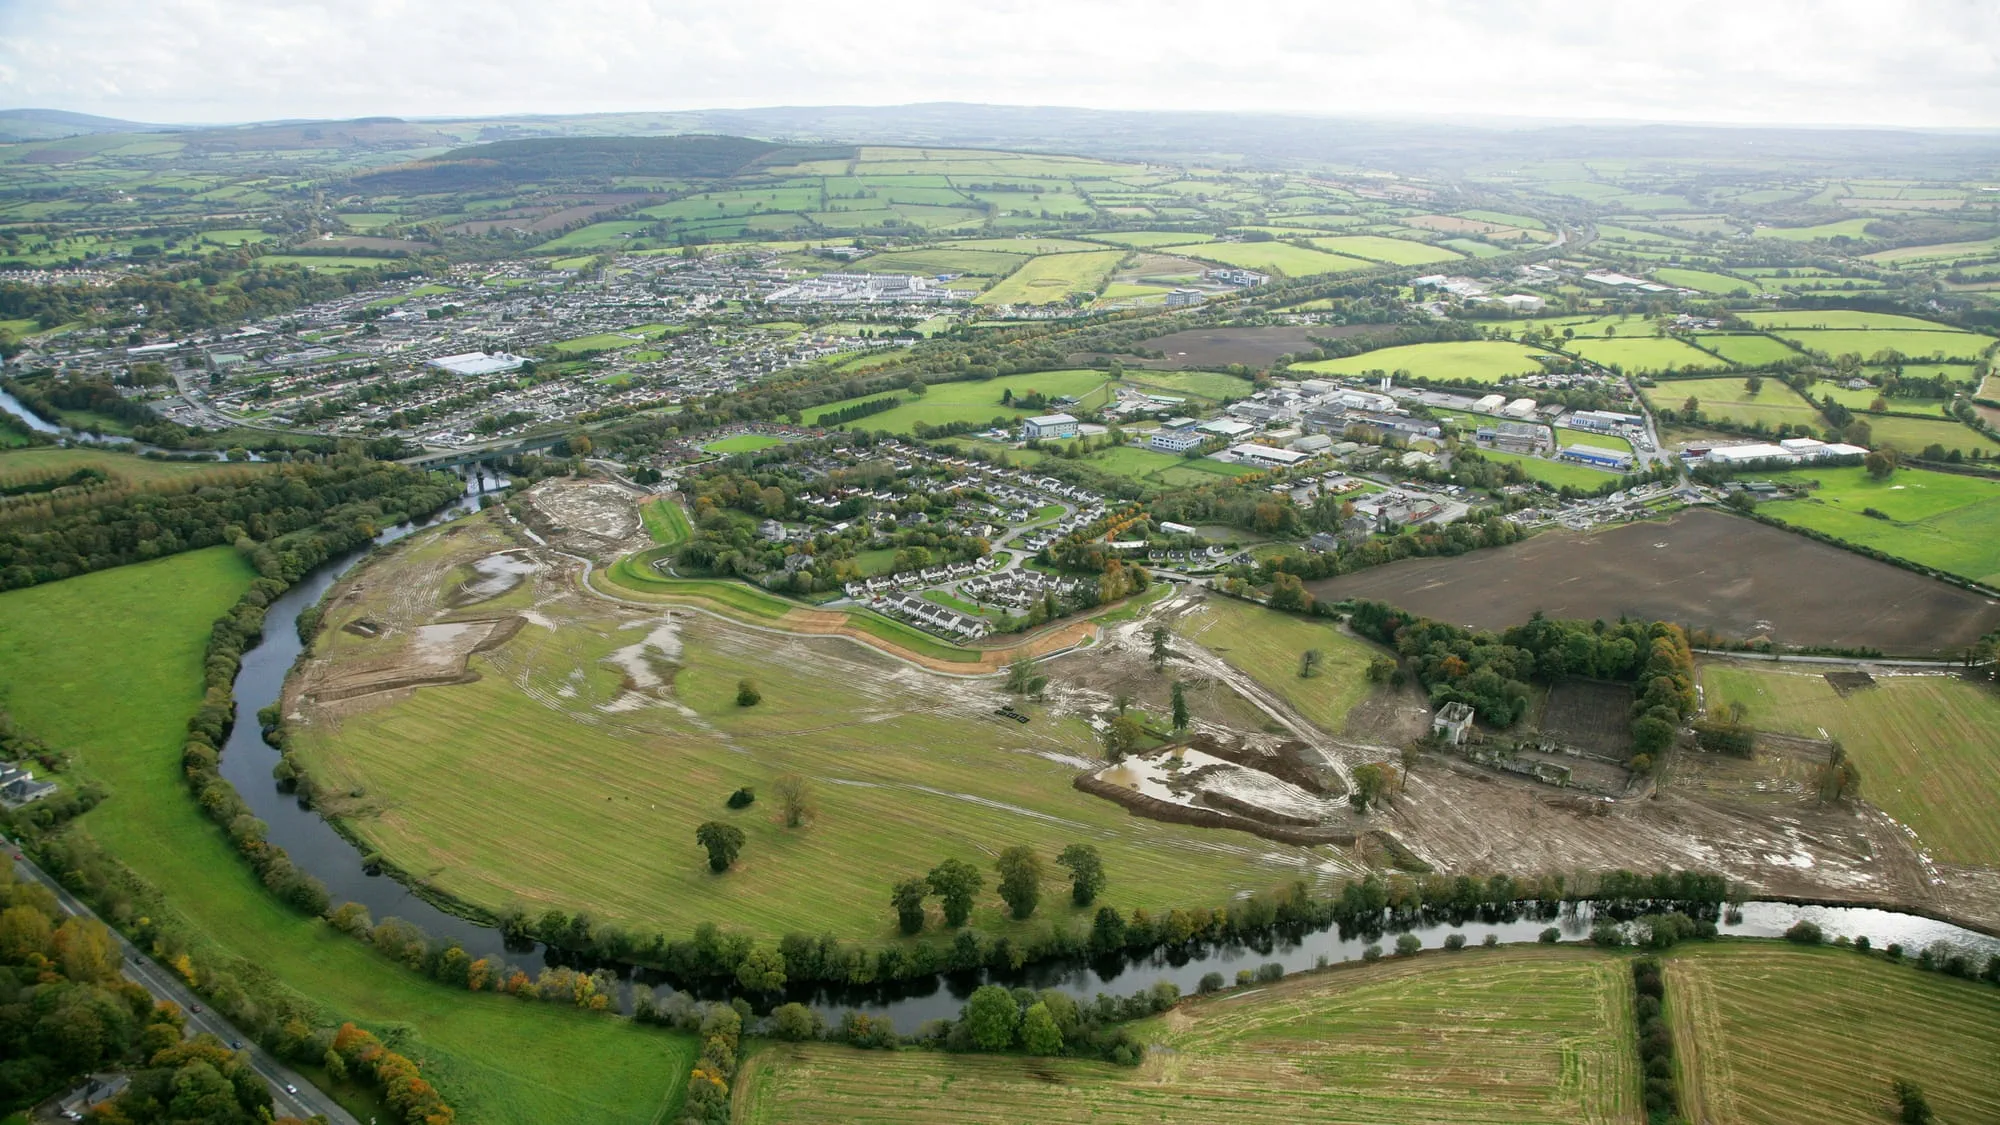 Aerial view of the town of Mallow and the Blackwater River